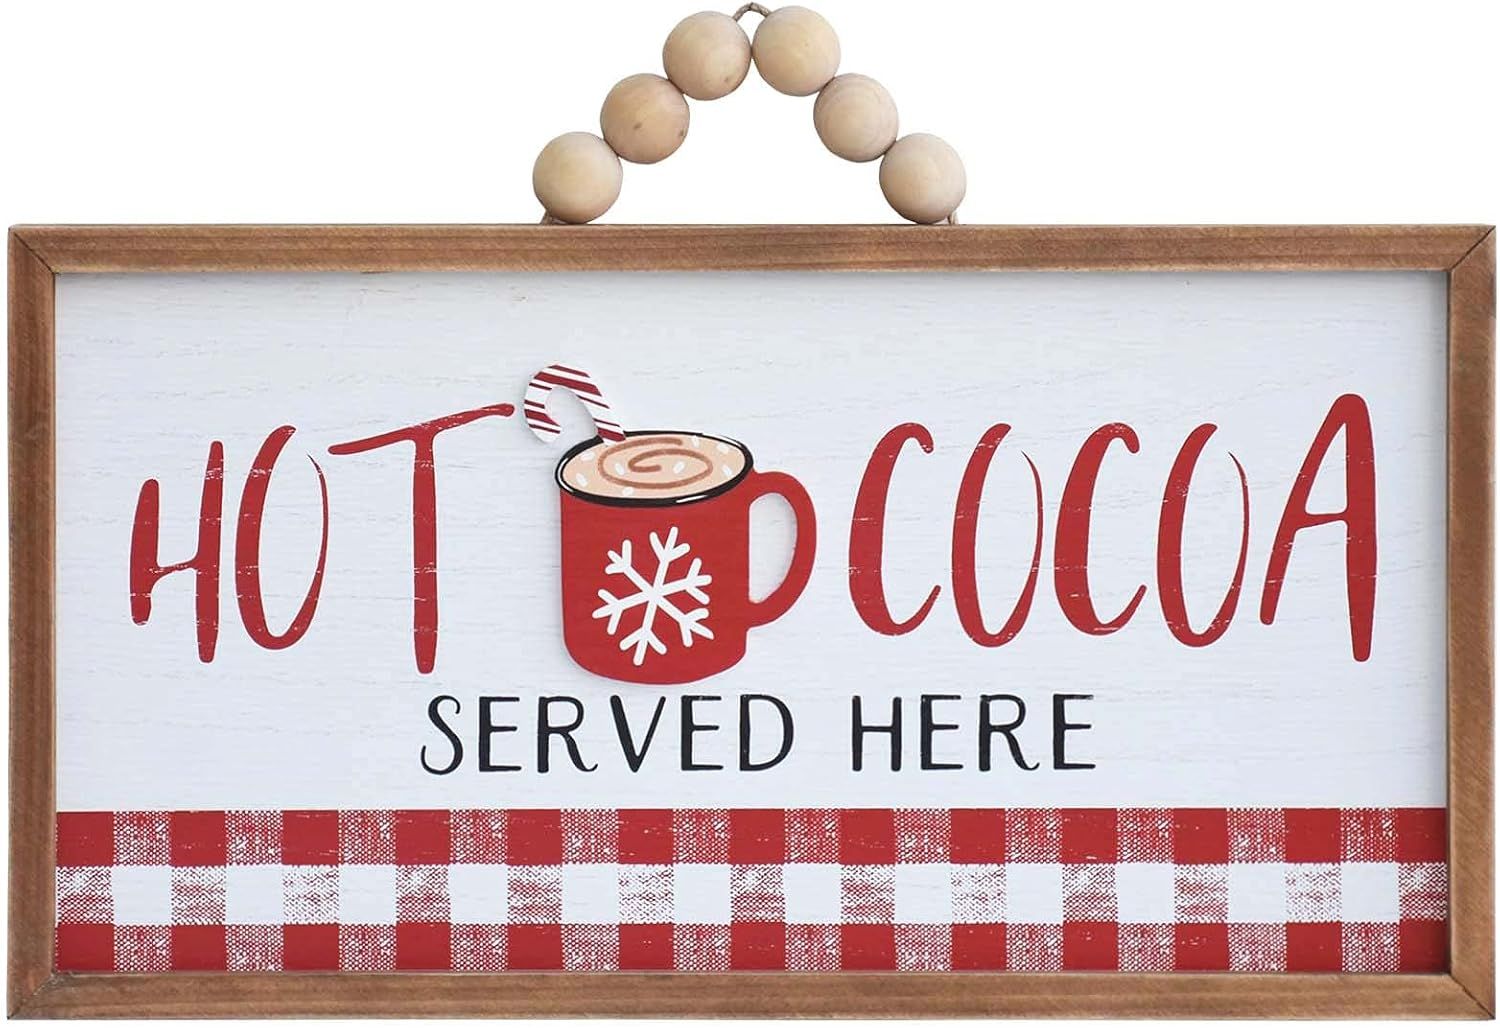 Paris Loft Hot Cocoa Sign, Wooden Hot Cocoa Served Here Hanging Sign, Wood Bead Hanger, Framed Co... | Amazon (US)